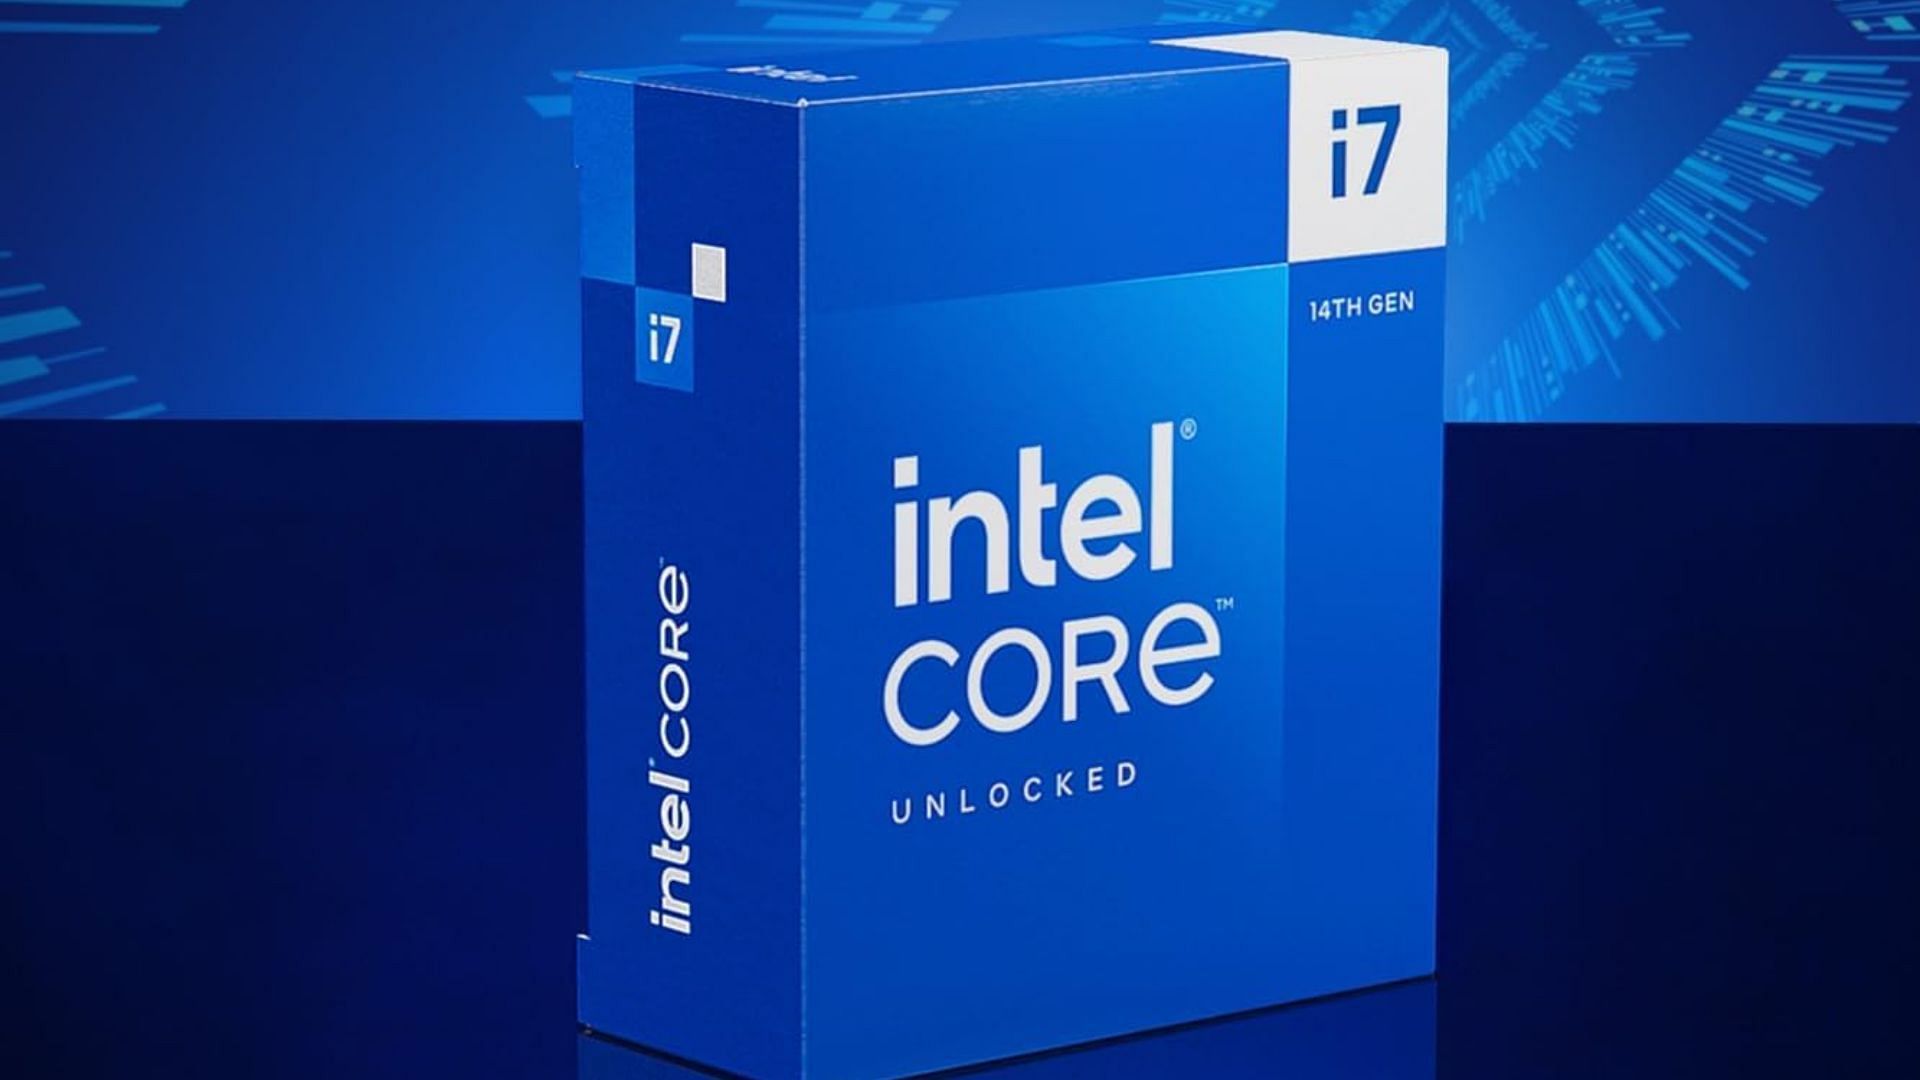 Packaging of the Core i7-14700K (Image via Intel)